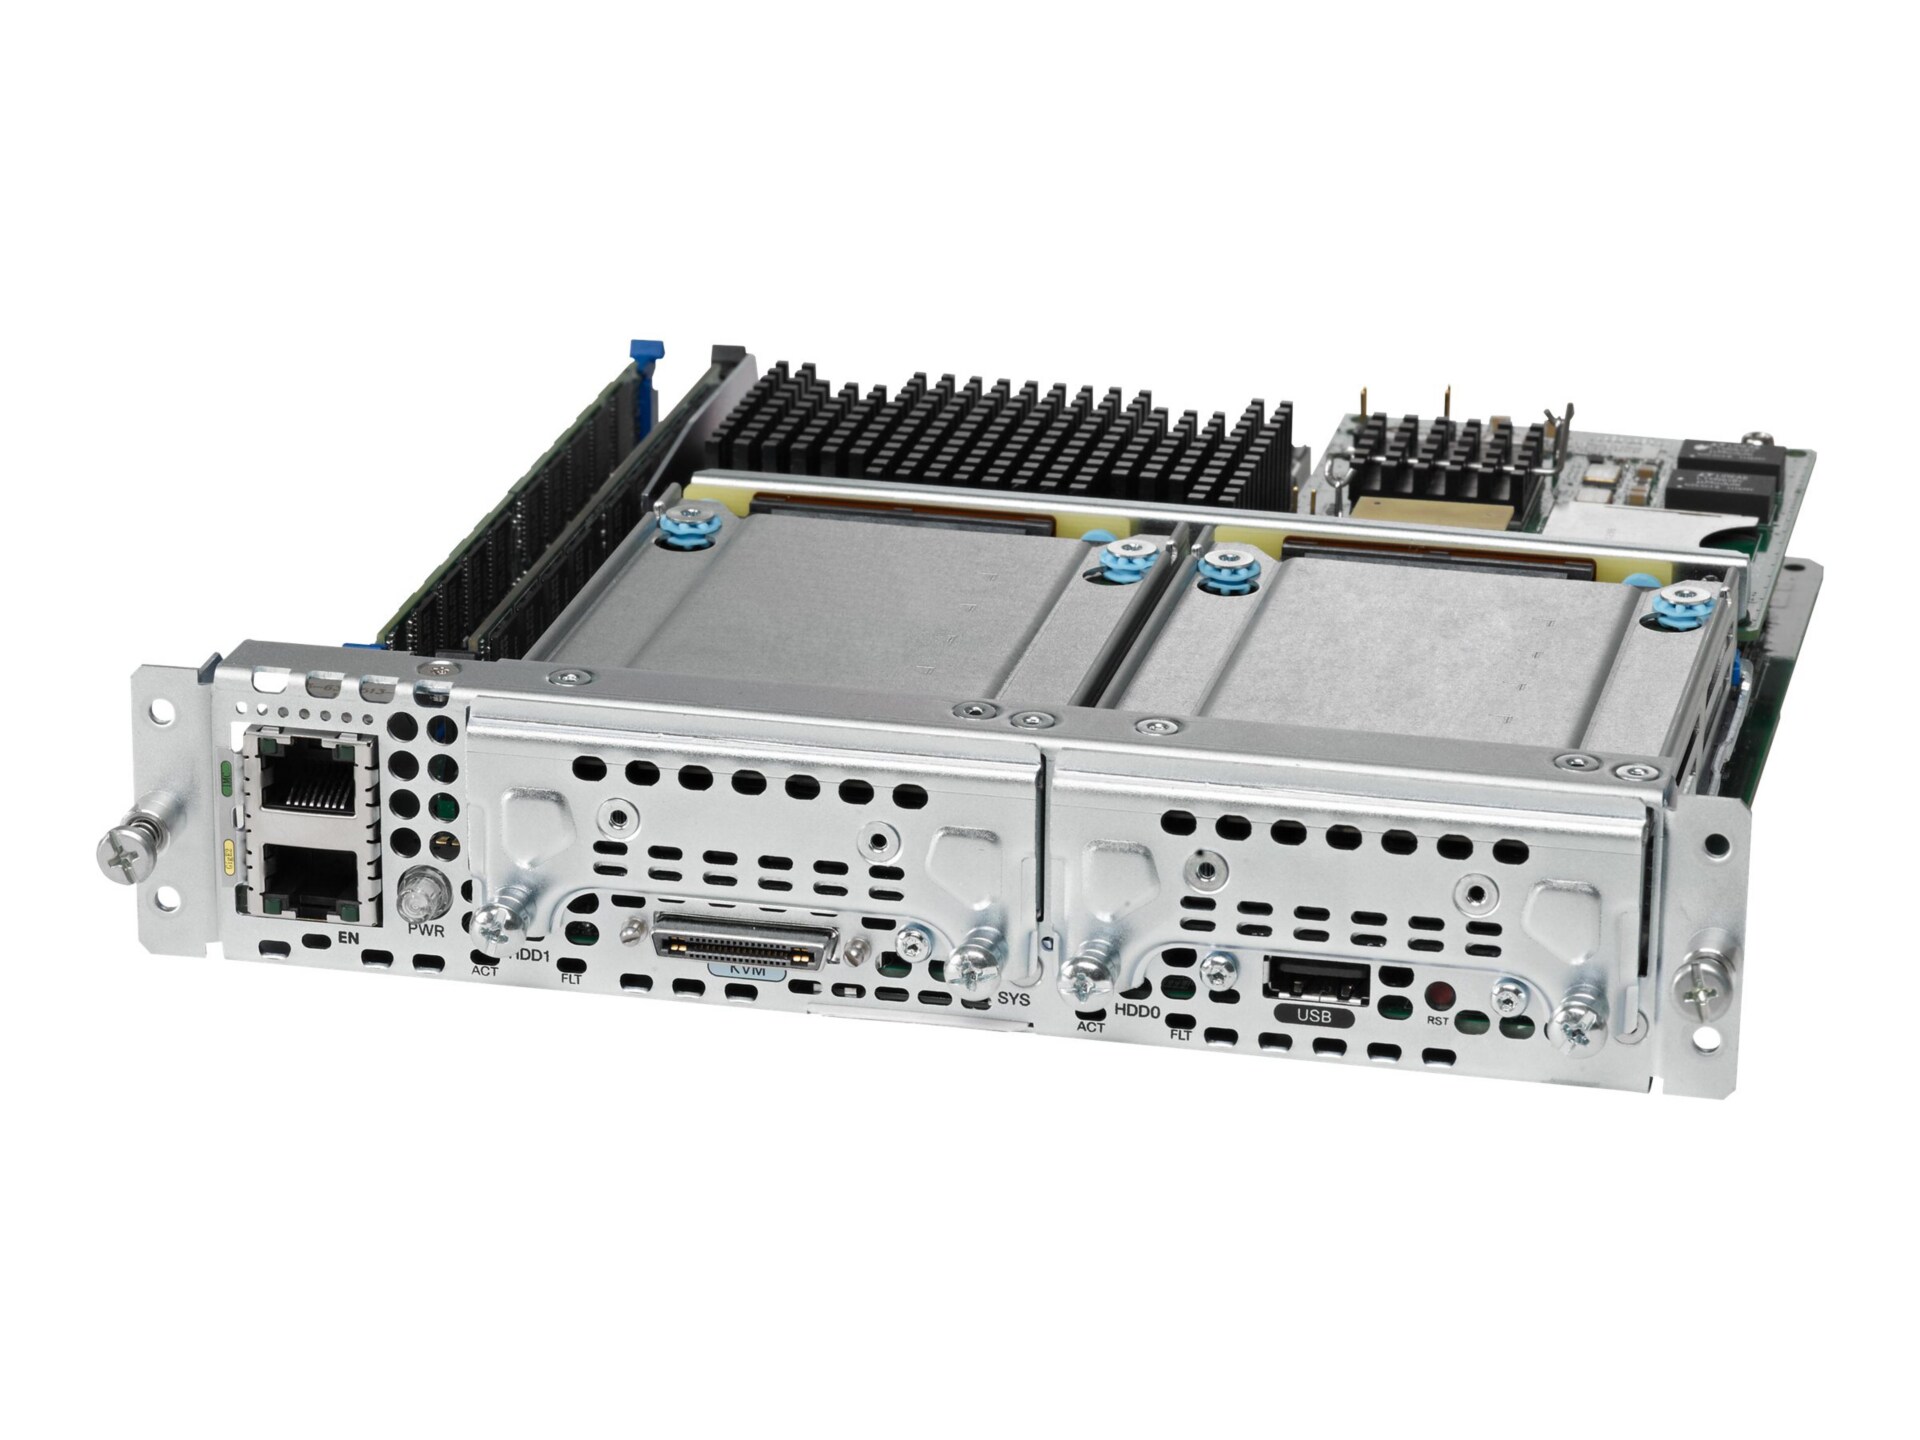 Cisco UCS E140S M1 - blade - Xeon E3-1105C 1 GHz - 8 GB - no HDD - with Cisco Integrated Services Routers Generation 2